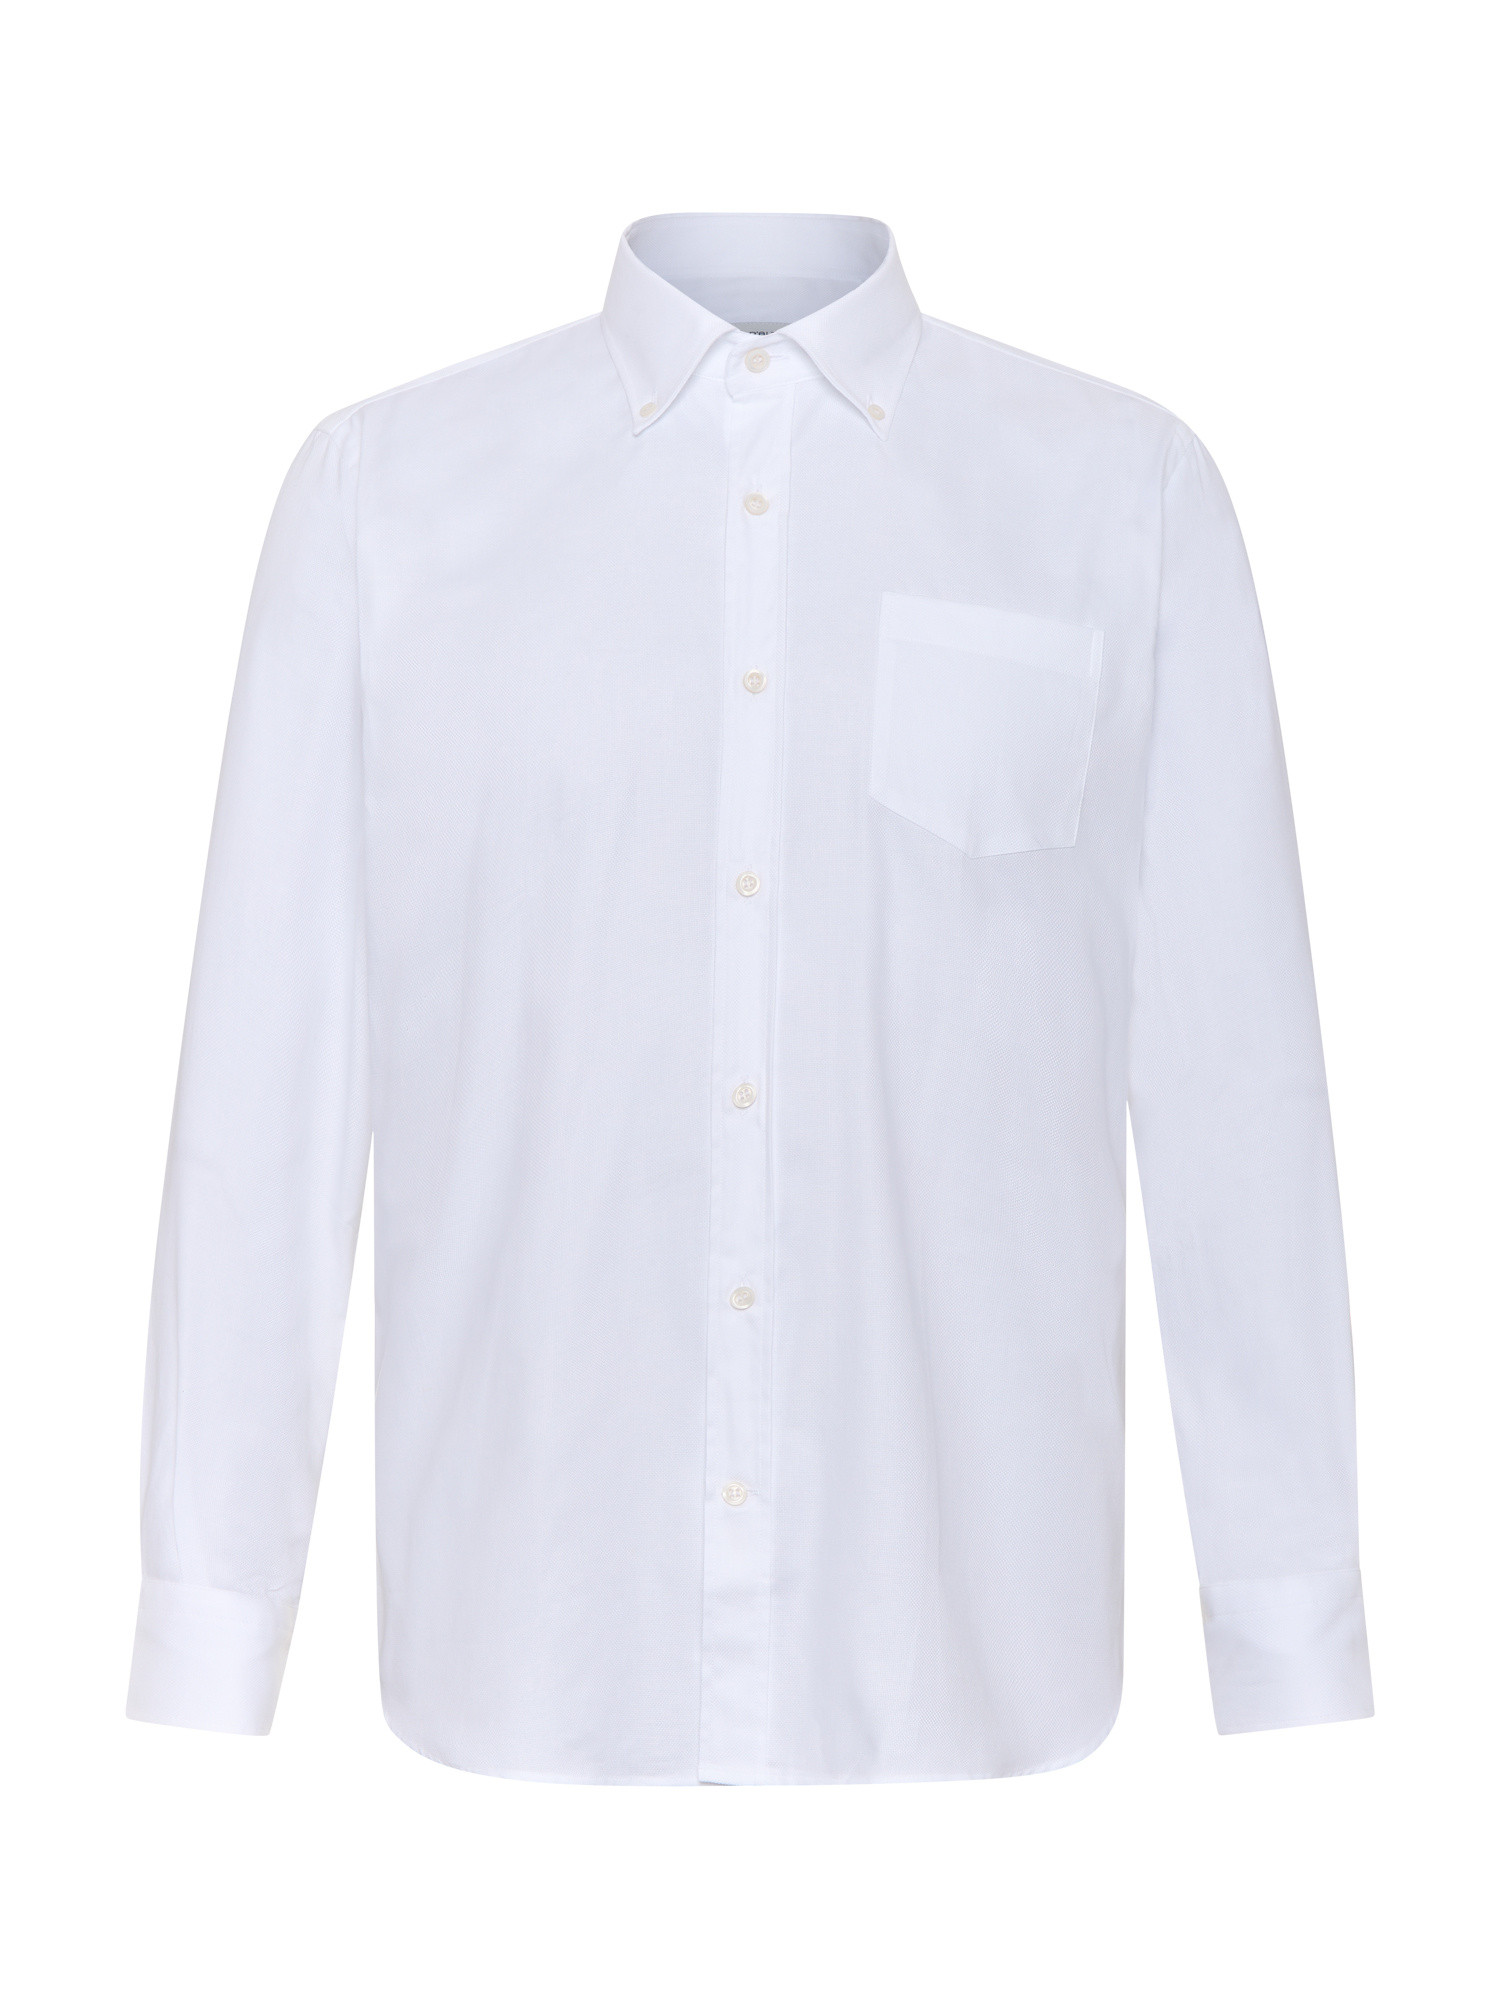 Luca D'Altieri - Regular fit chasuble shirt in pure textured cotton, White, large image number 1